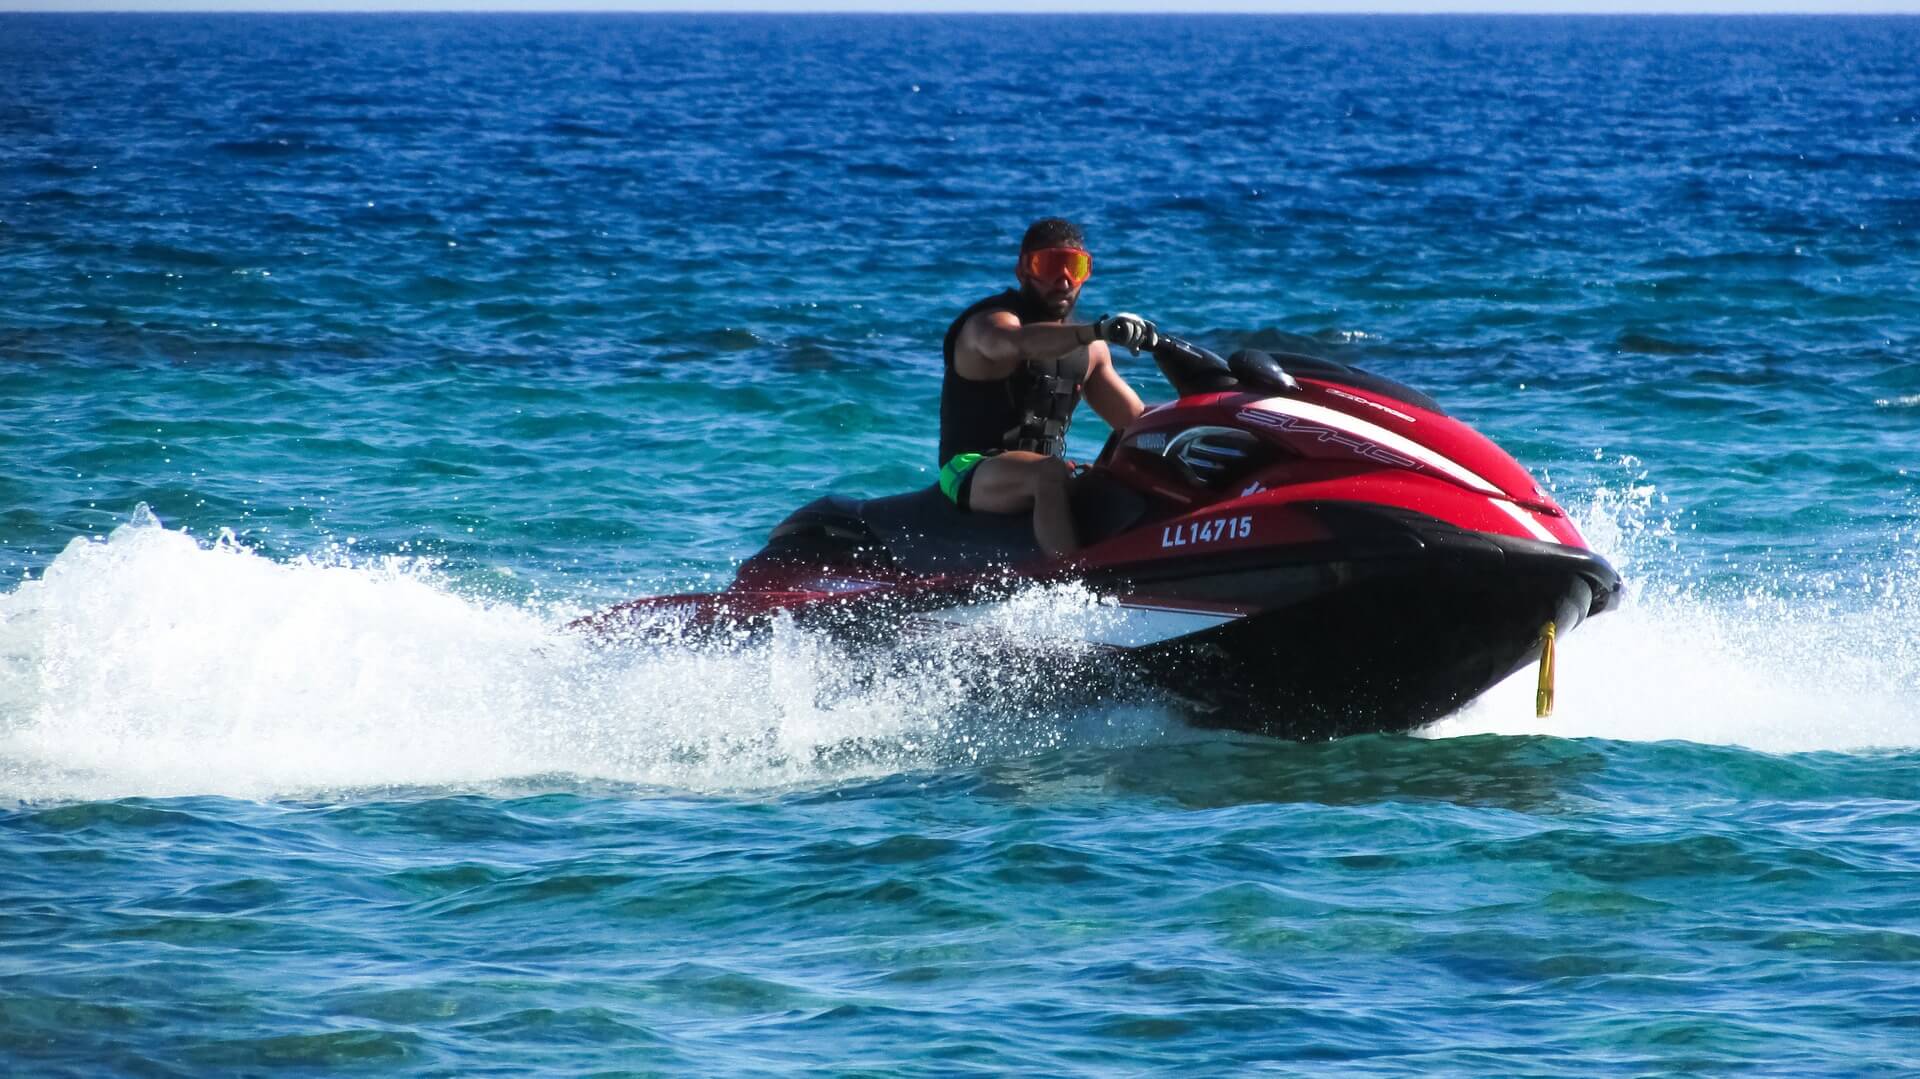 Man riding red jetski going fast over waves on blue sea